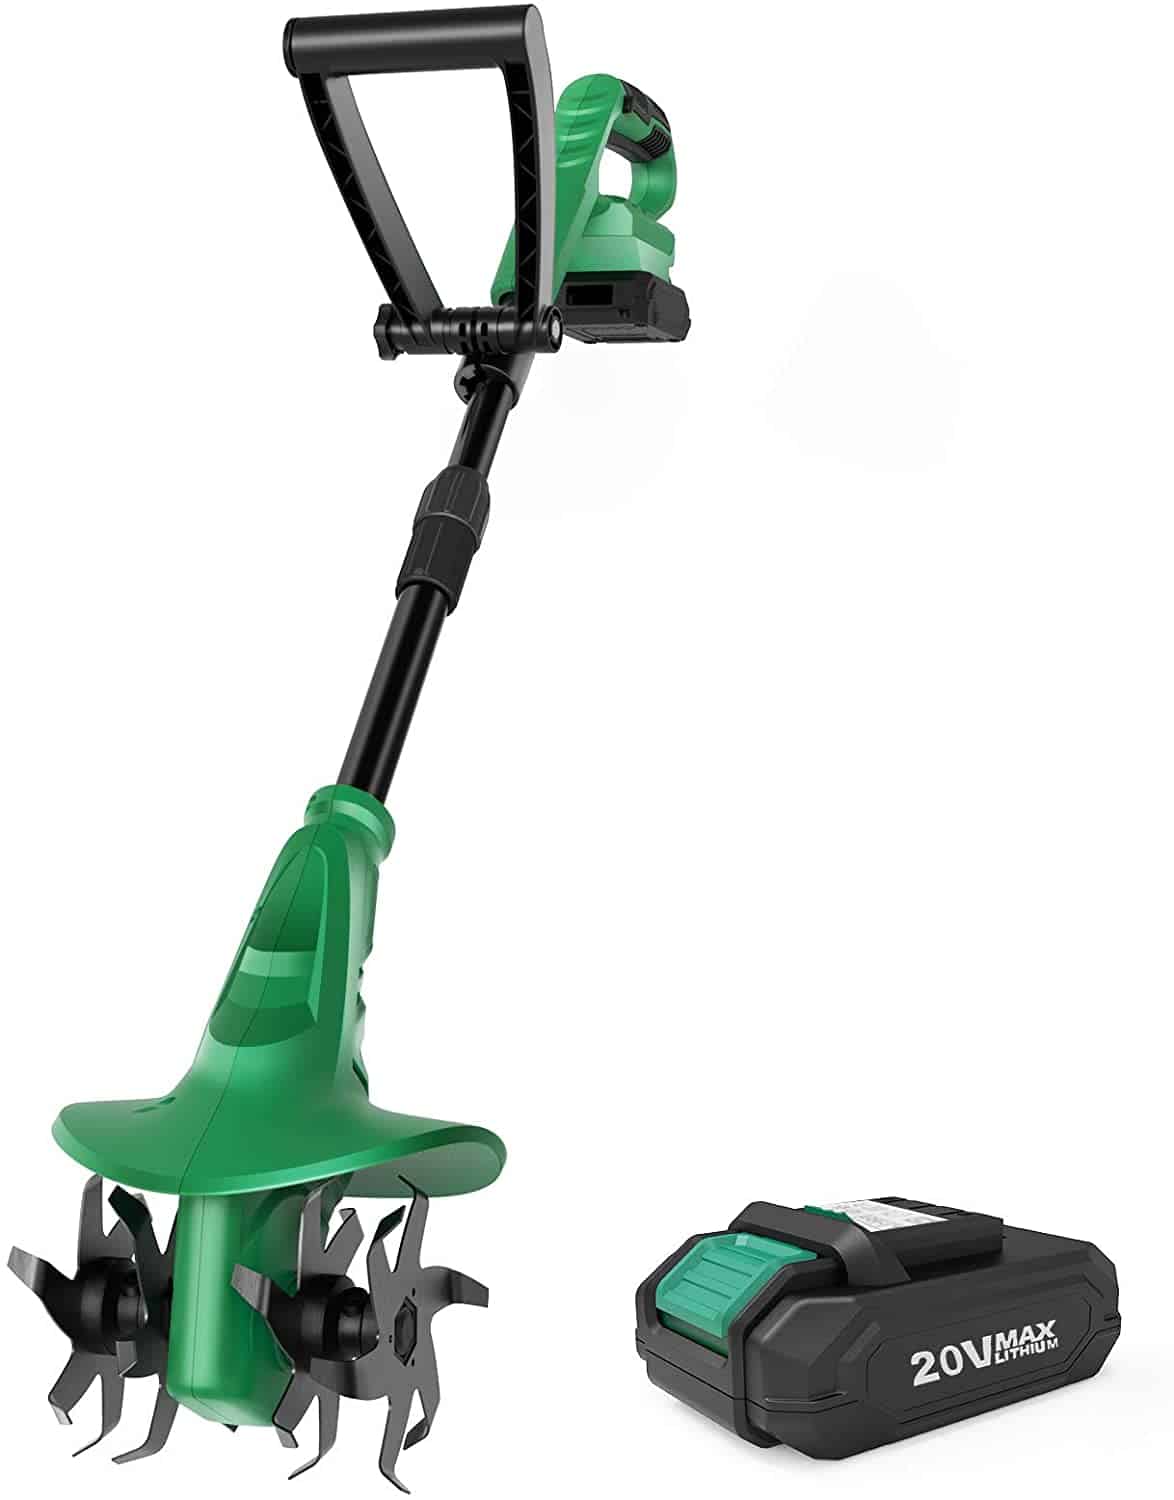 KIMO cordless electric tiller cultivator with battery and charger